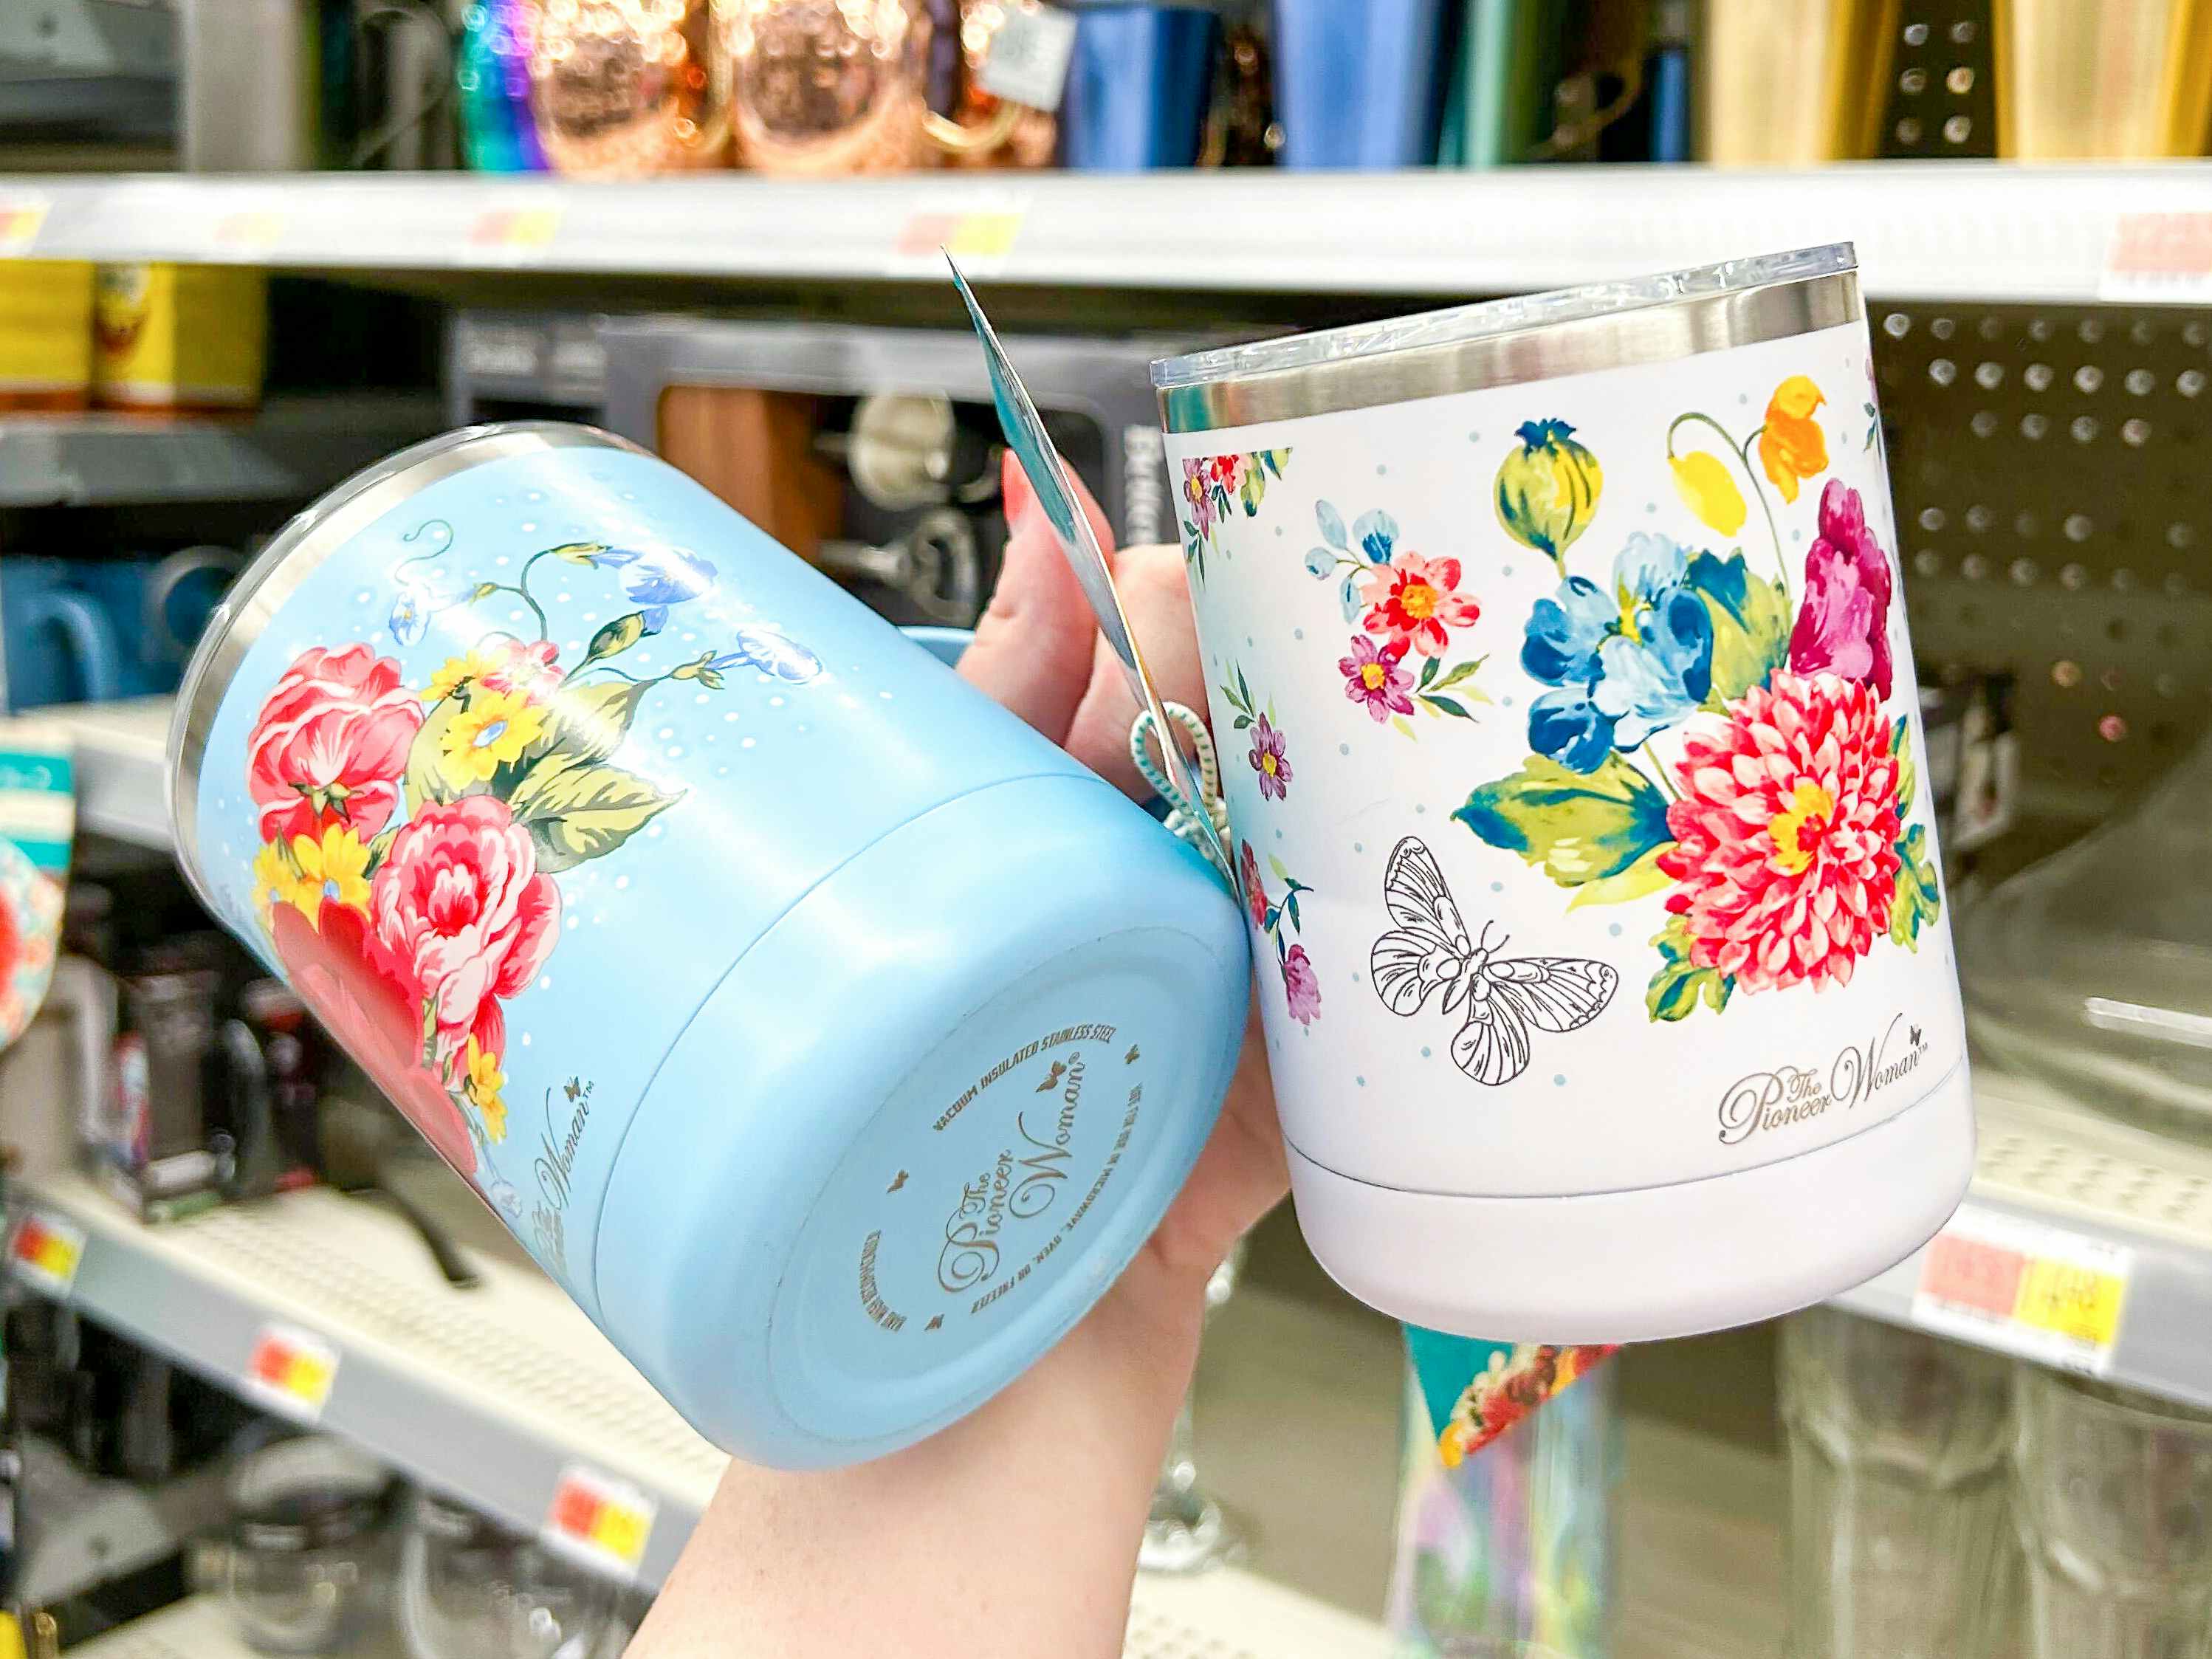 https://prod-cdn-thekrazycouponlady.imgix.net/wp-content/uploads/2023/04/walmart-pioneer-woman-two-floral-tumblers-2-1680894903-1680894903.jpg?auto=format&fit=fill&q=25